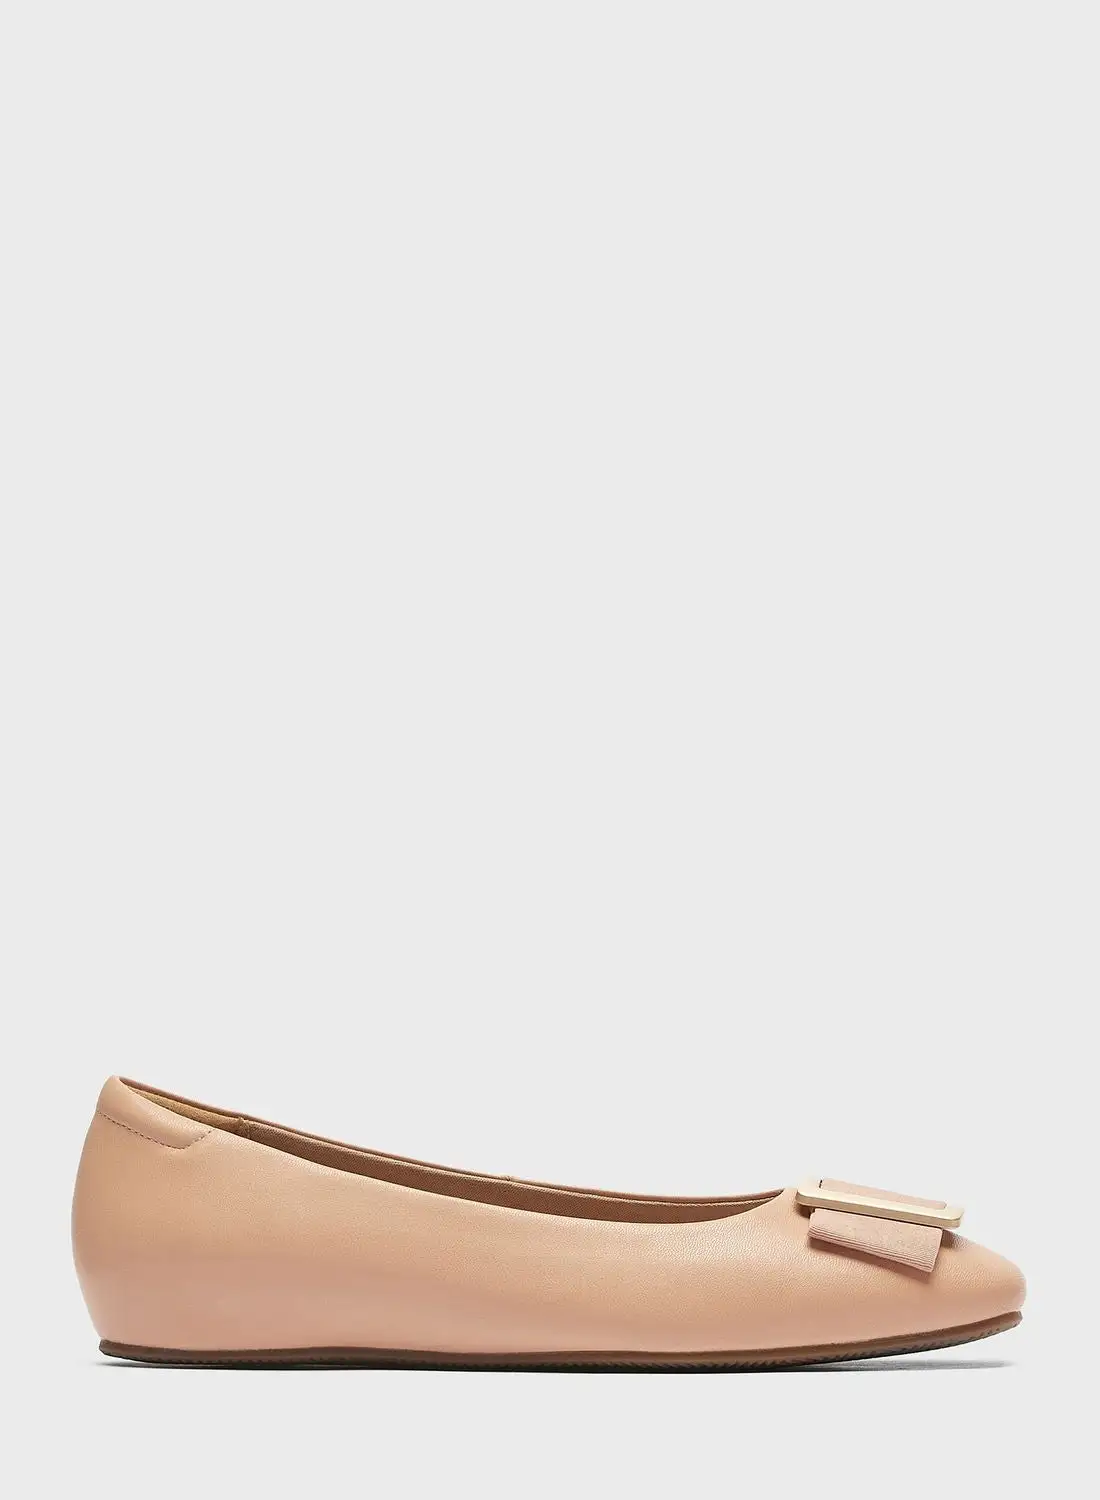 Le Confort Pointed Toe Moccasins